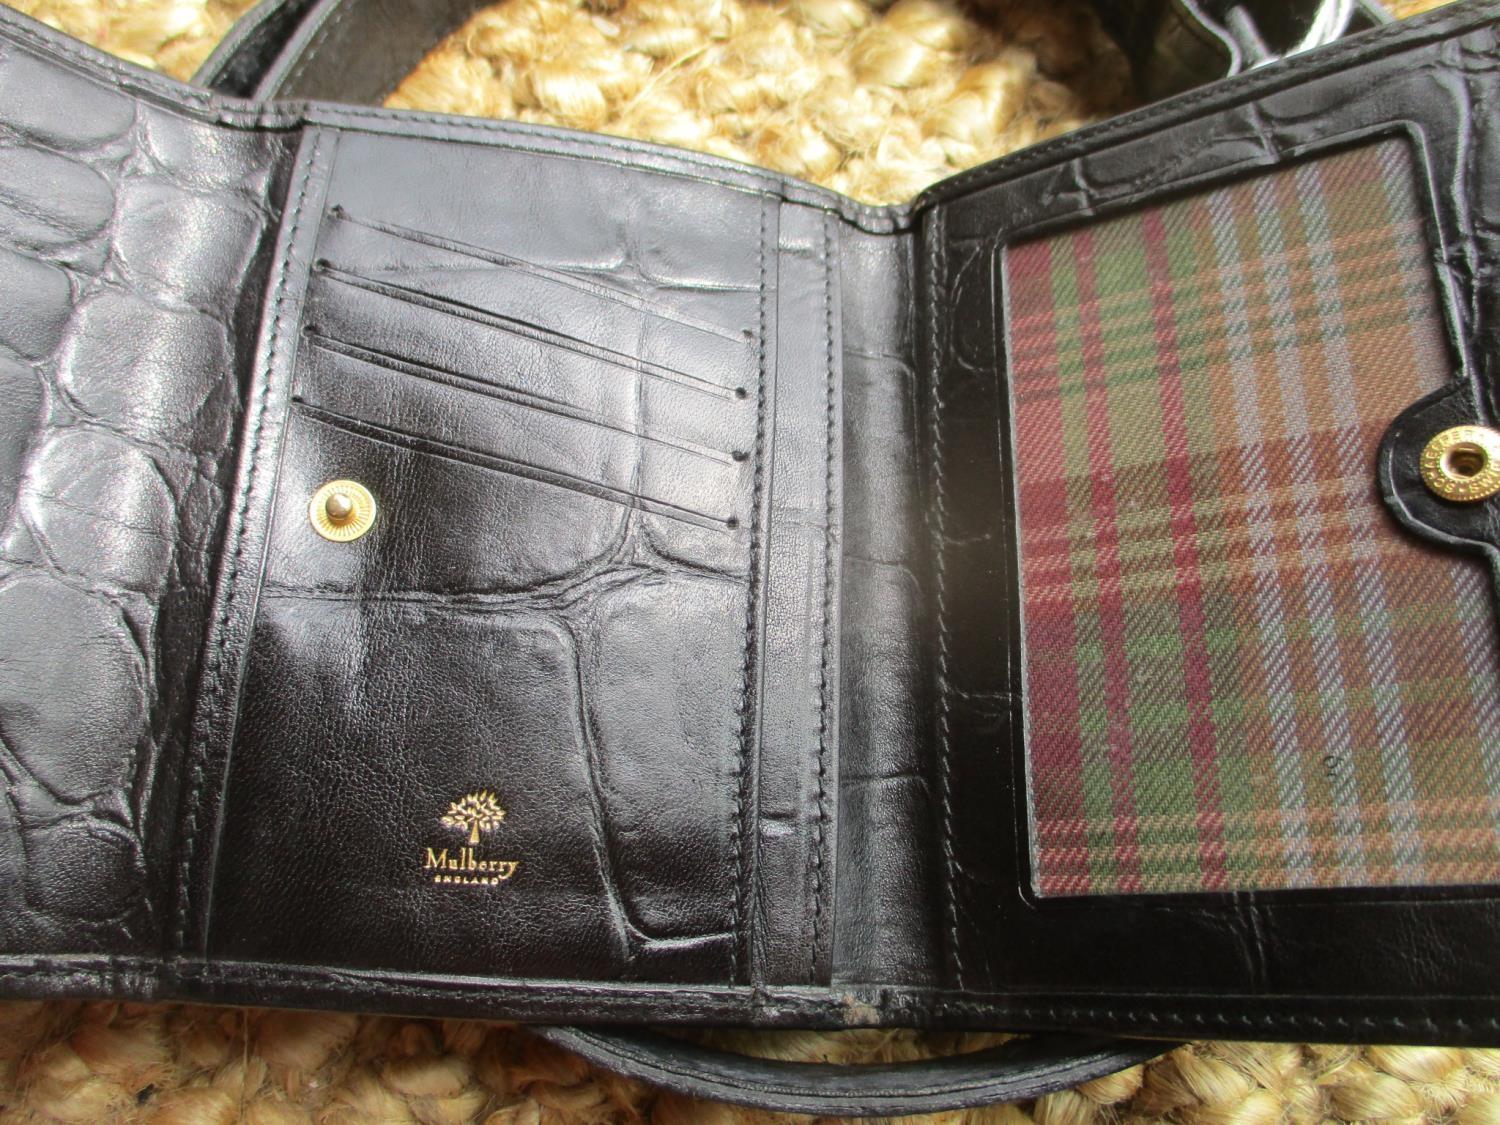 A Mulberry black leather wallet and a matching Mulberry belt, both in a crocodile textured - Image 7 of 8